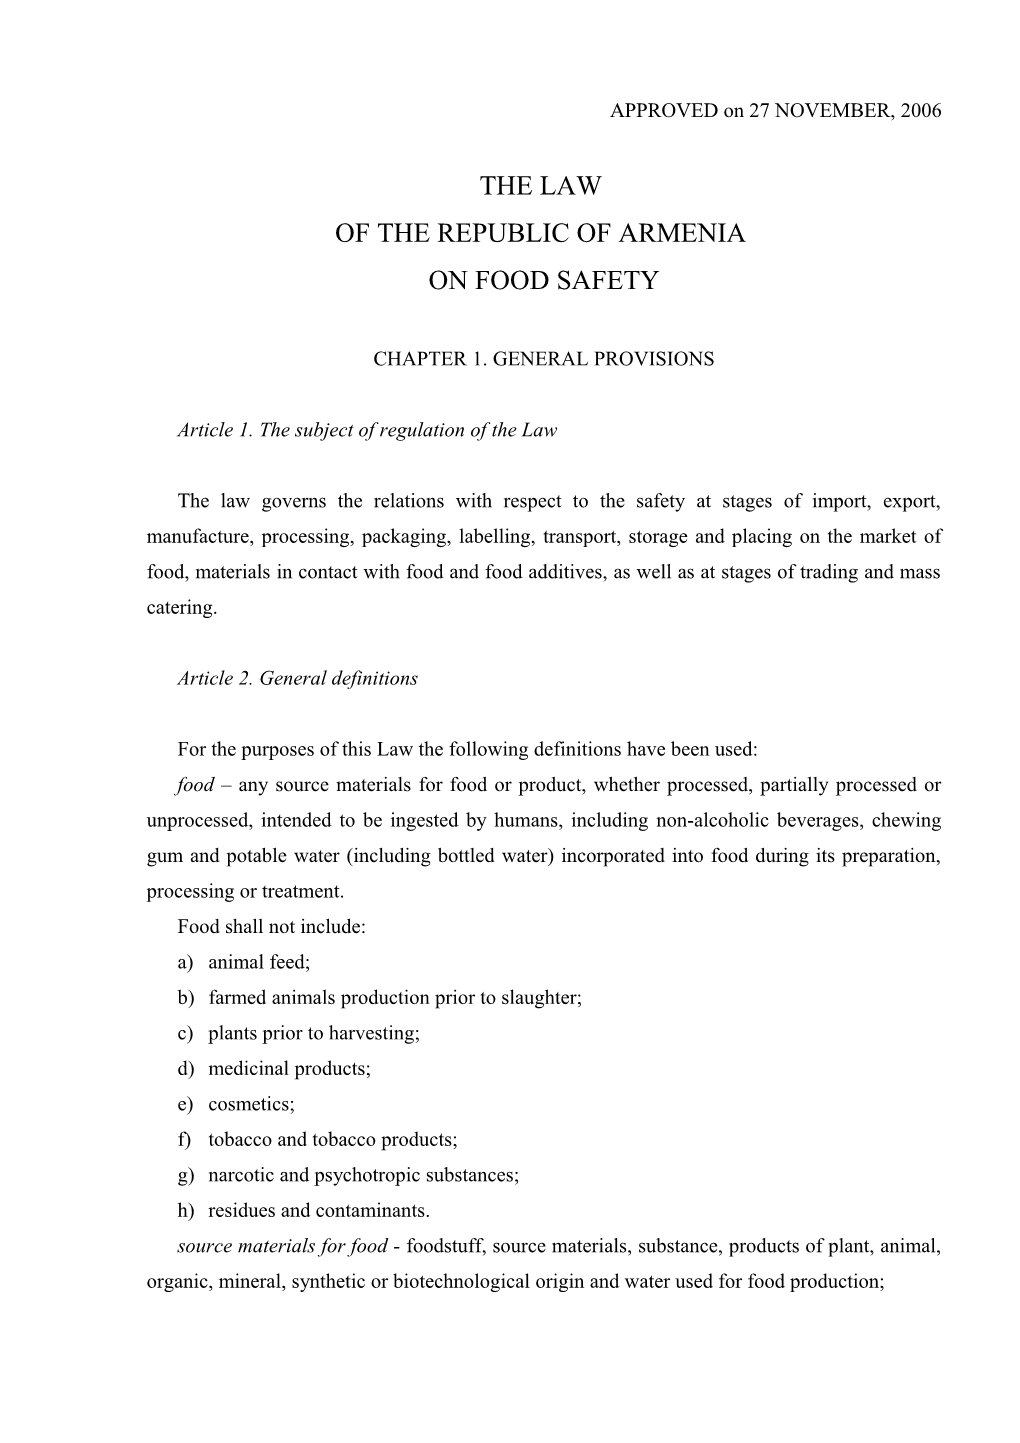 The Law of the Republic of Armenia on Food Safety